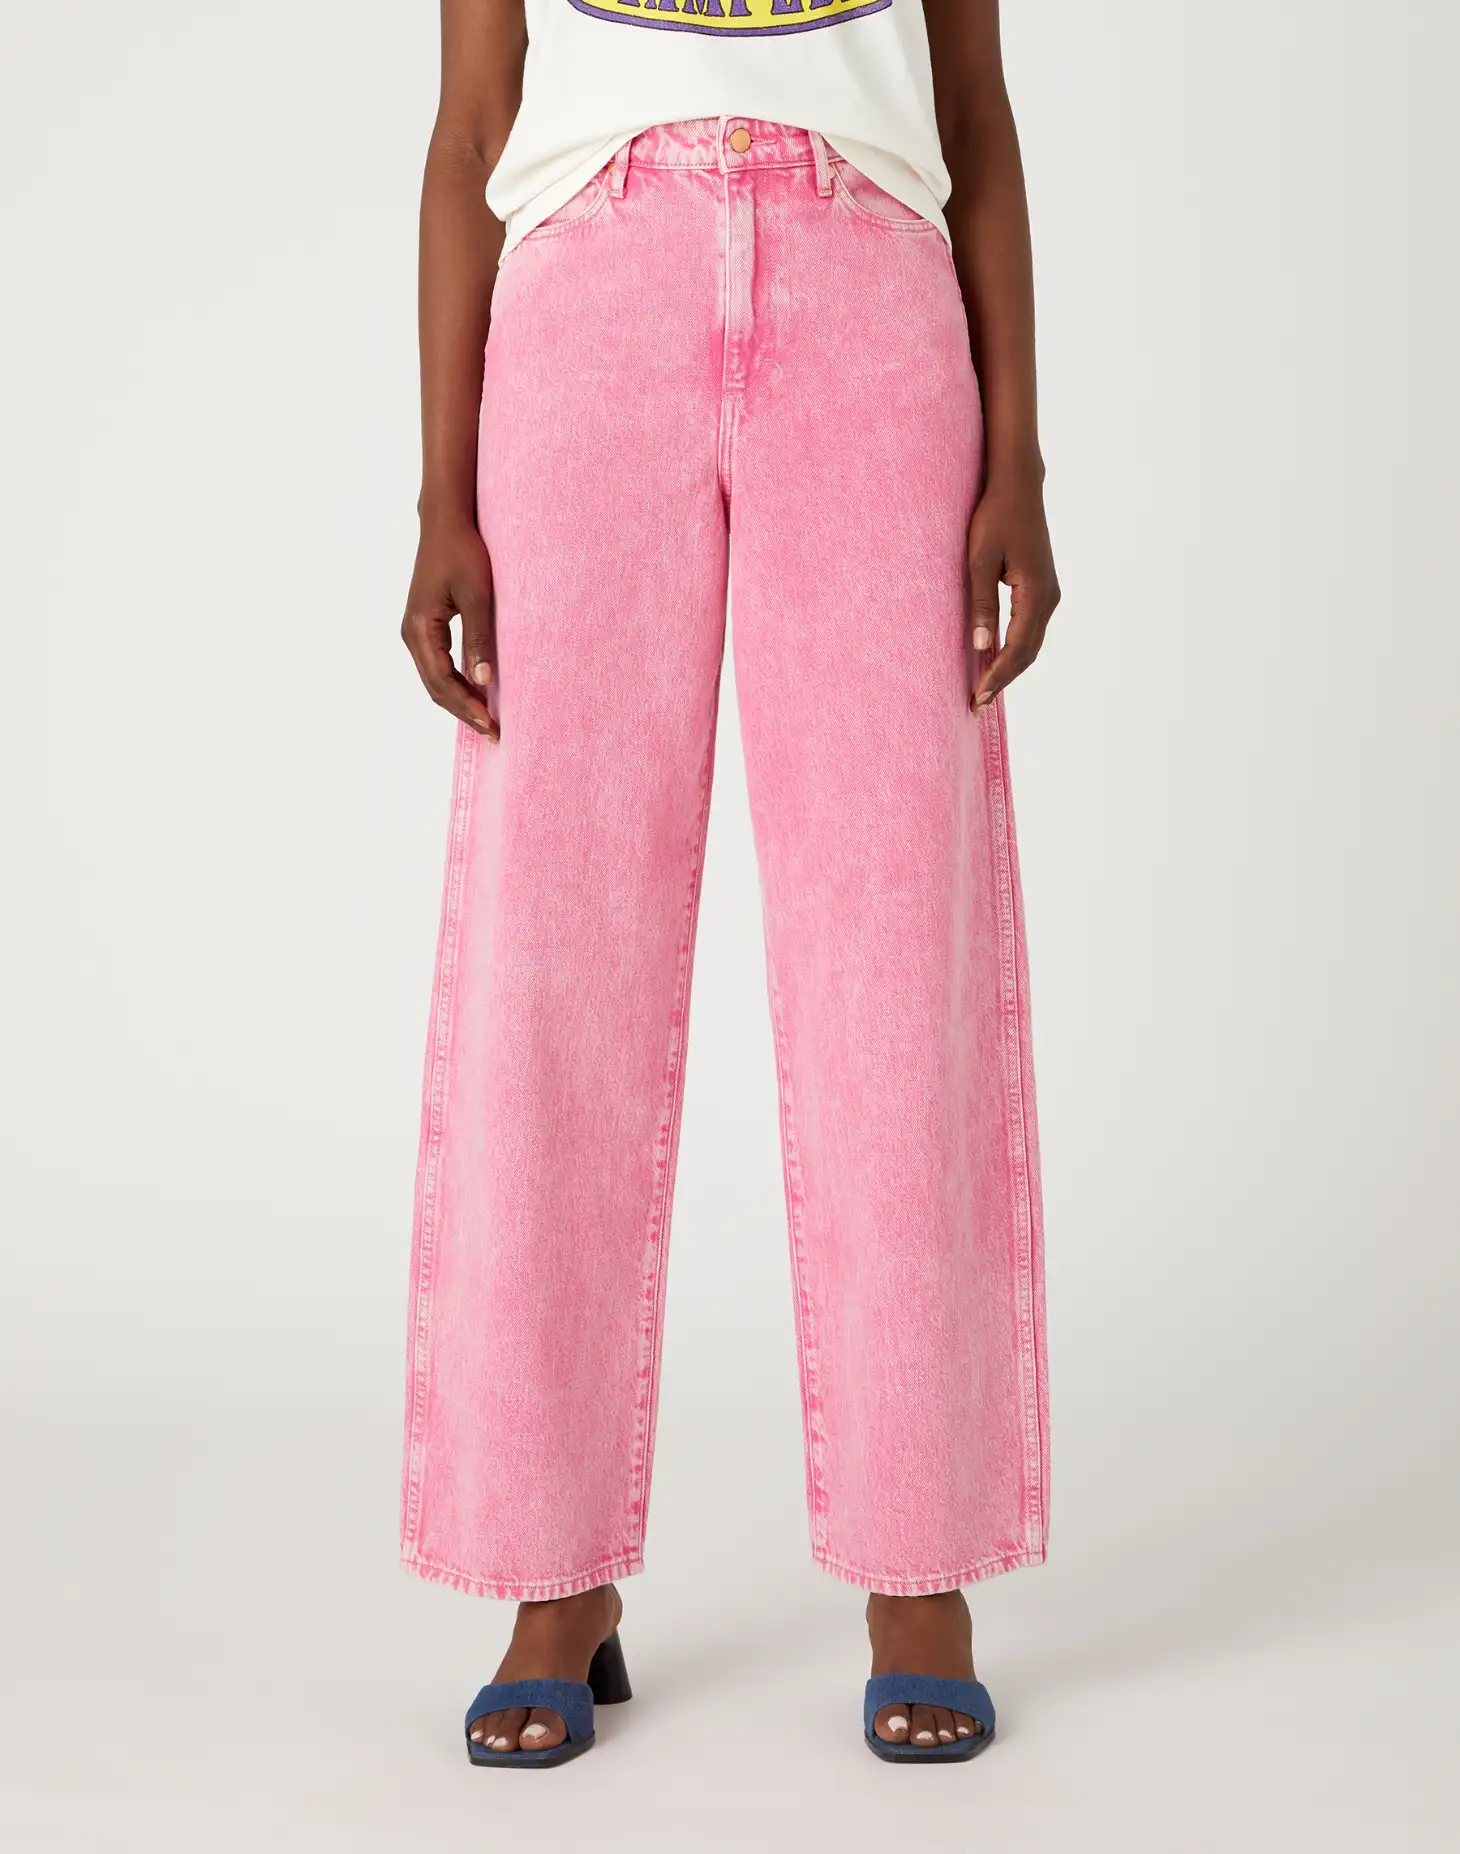 Wrangler High-Rise Tapered Barrel Jeans  Anthropologie Japan - Women's  Clothing, Accessories & Home